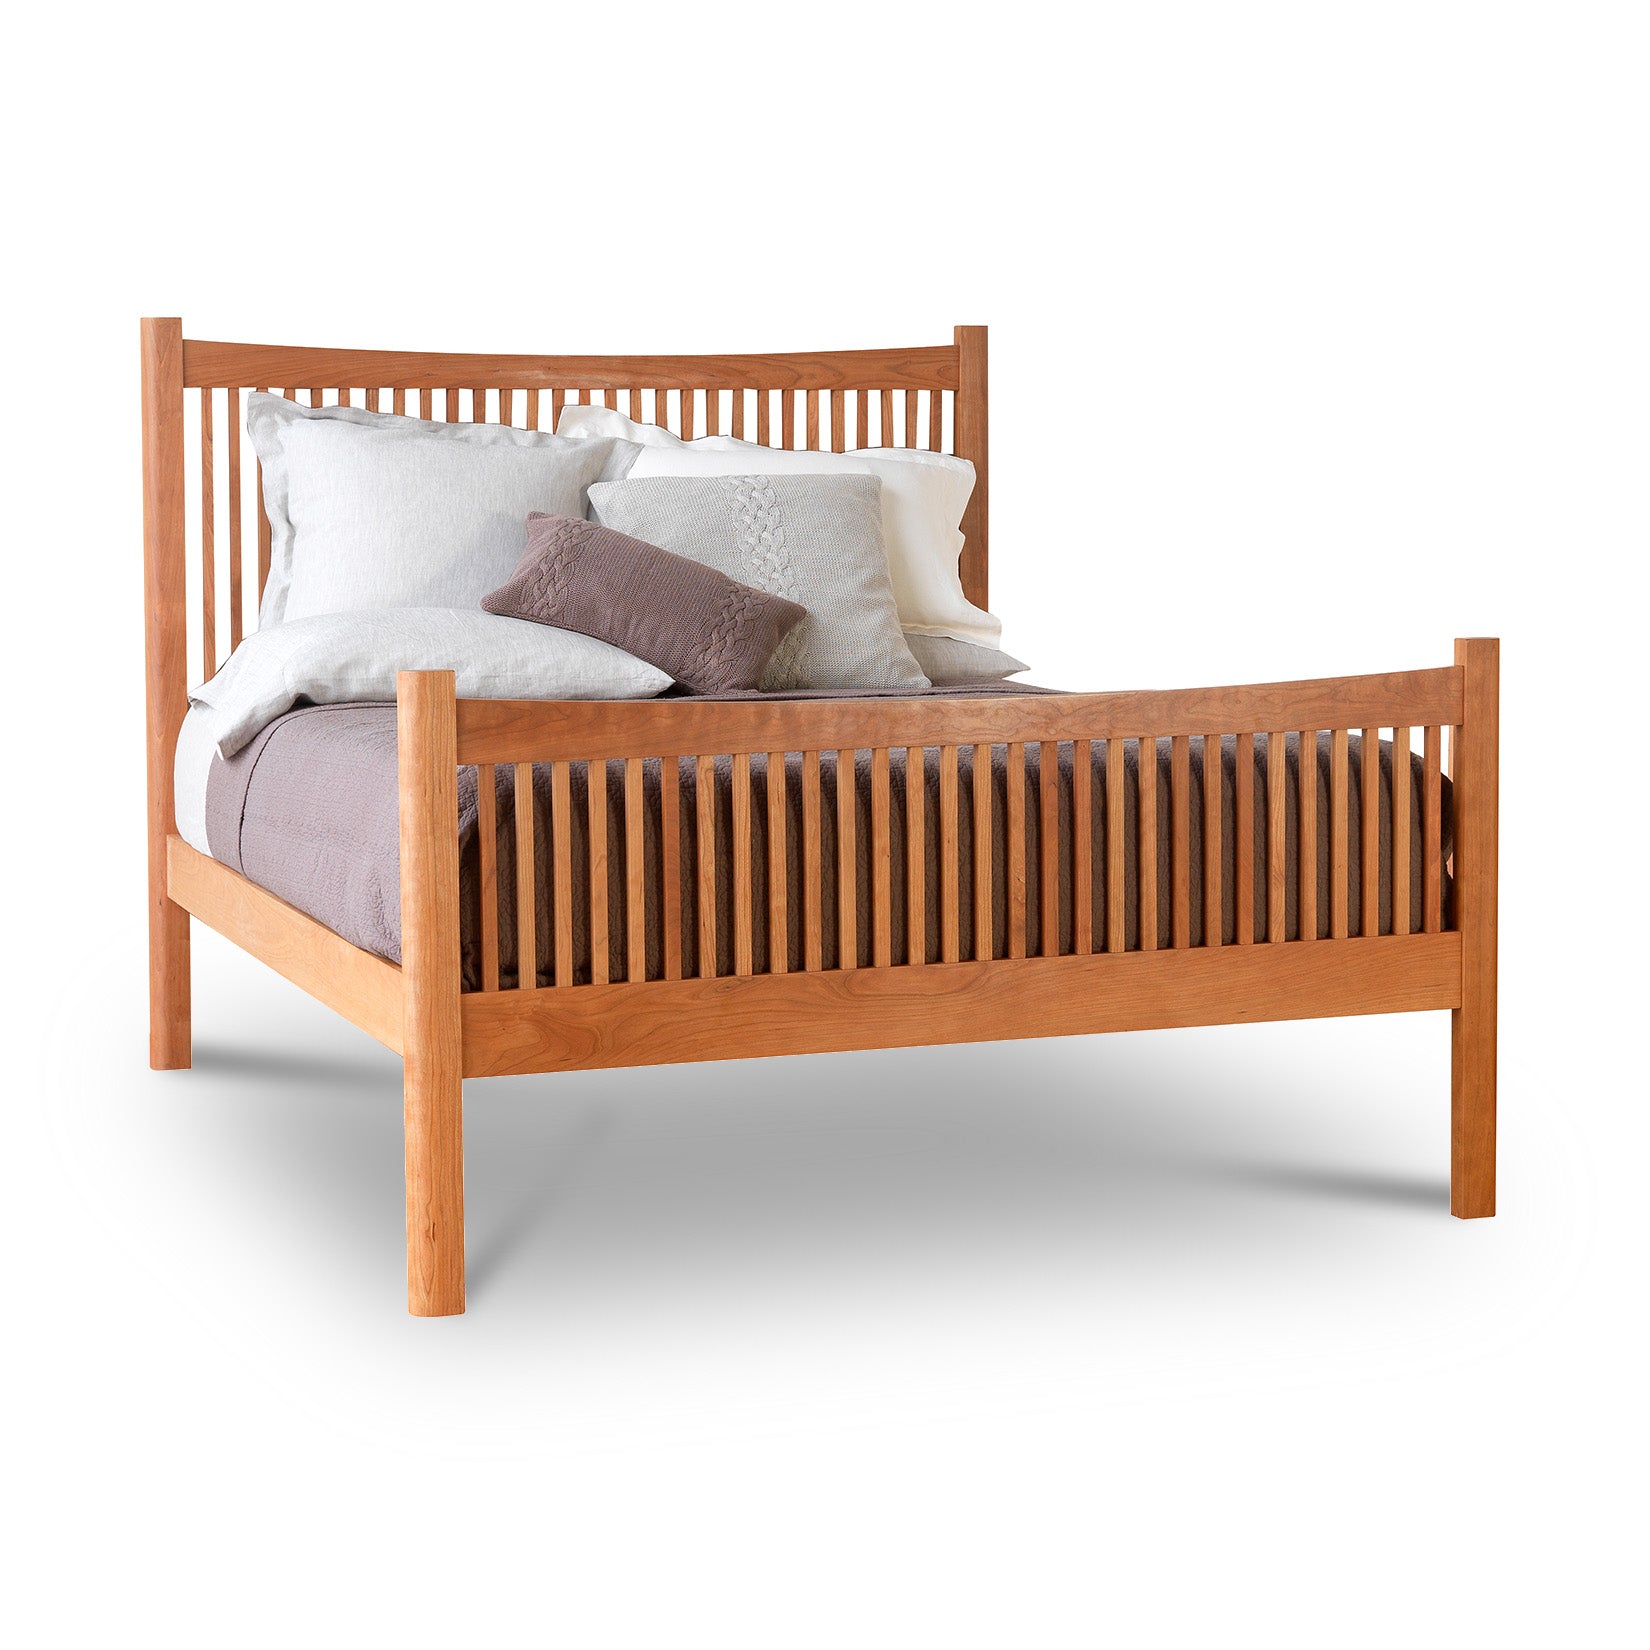 A Vermont Furniture Designs Heartwood Shaker High Footboard Bed with a slatted headboard and footboard, fitted with white and brown pillows, isolated on a white background.